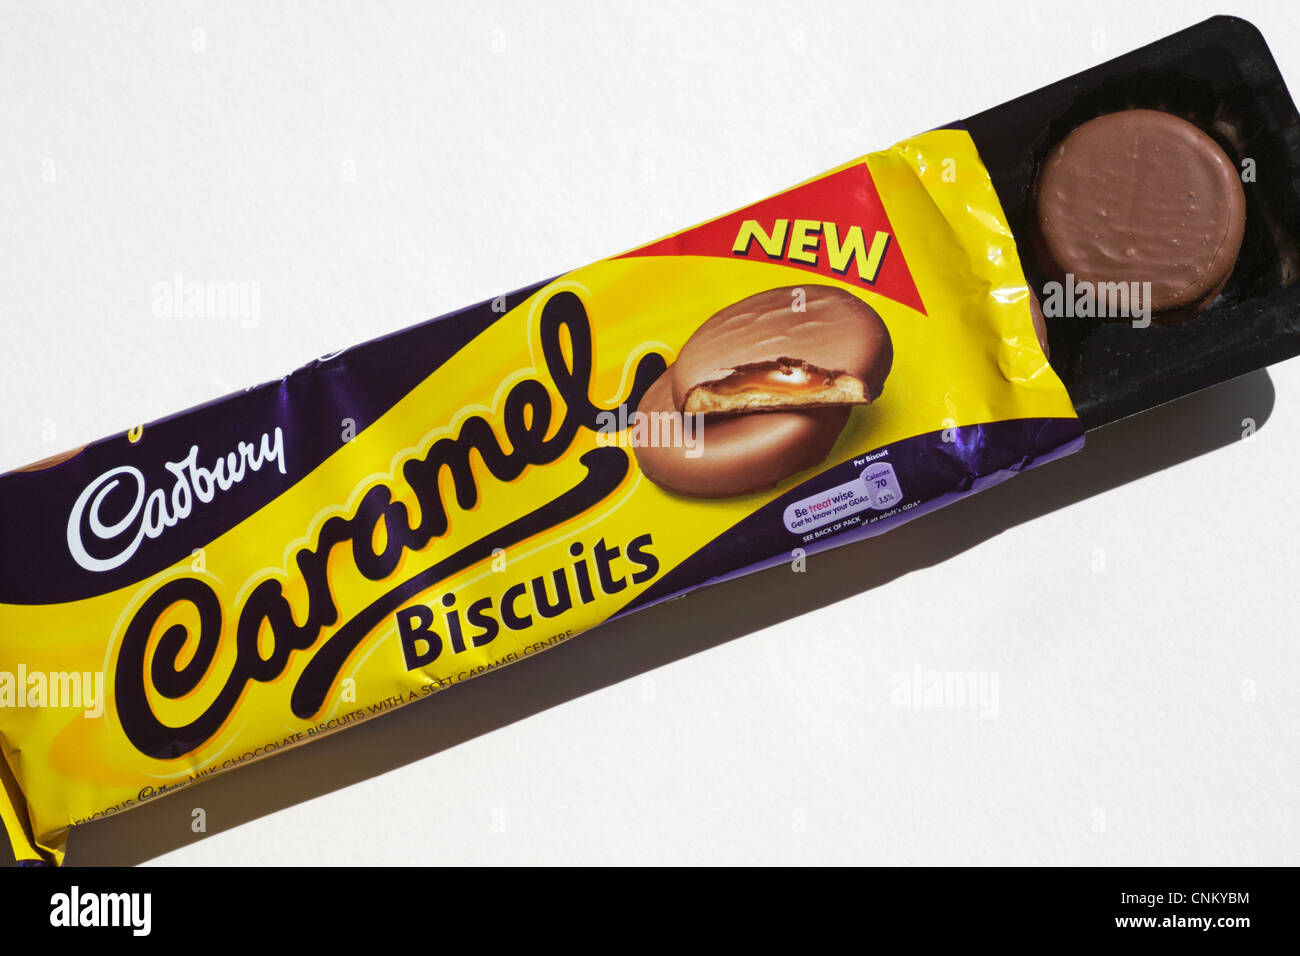 packet of  new Cadbury Caramel biscuits with packet opened to show contents set on white background Stock Photo